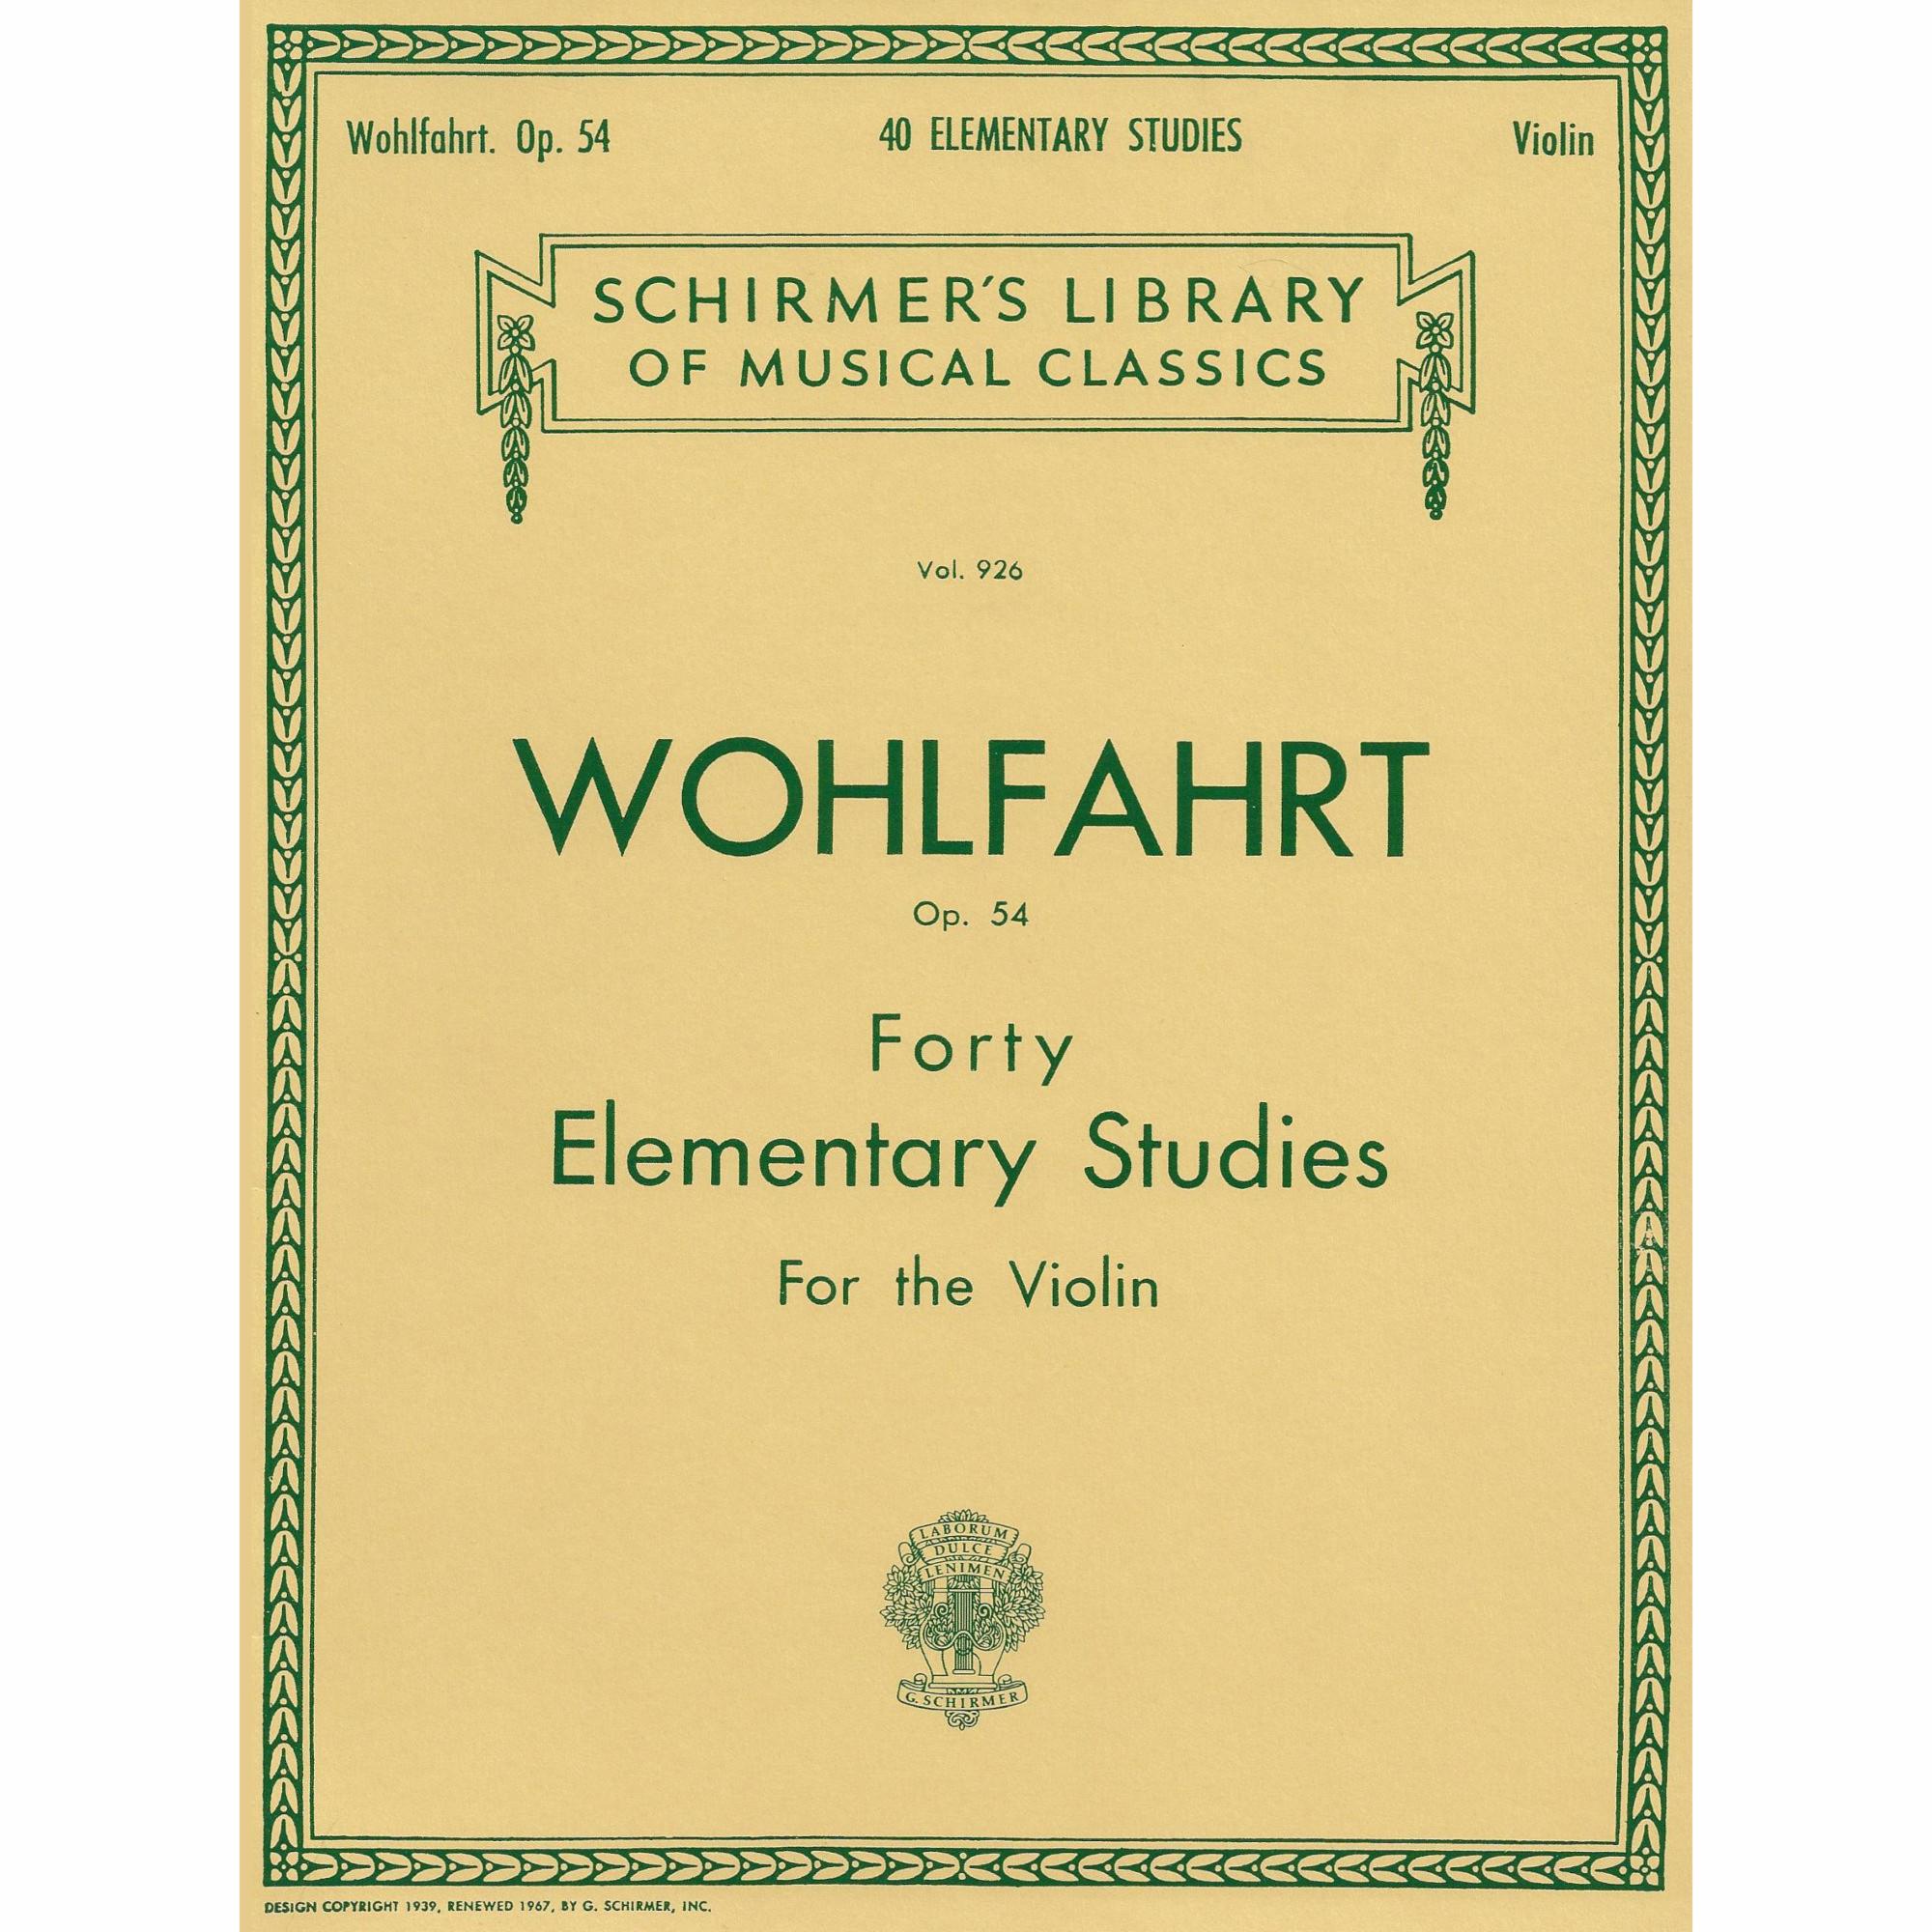 Wohlfahrt -- Forty Elementary Studies, Op. 54 for Violin